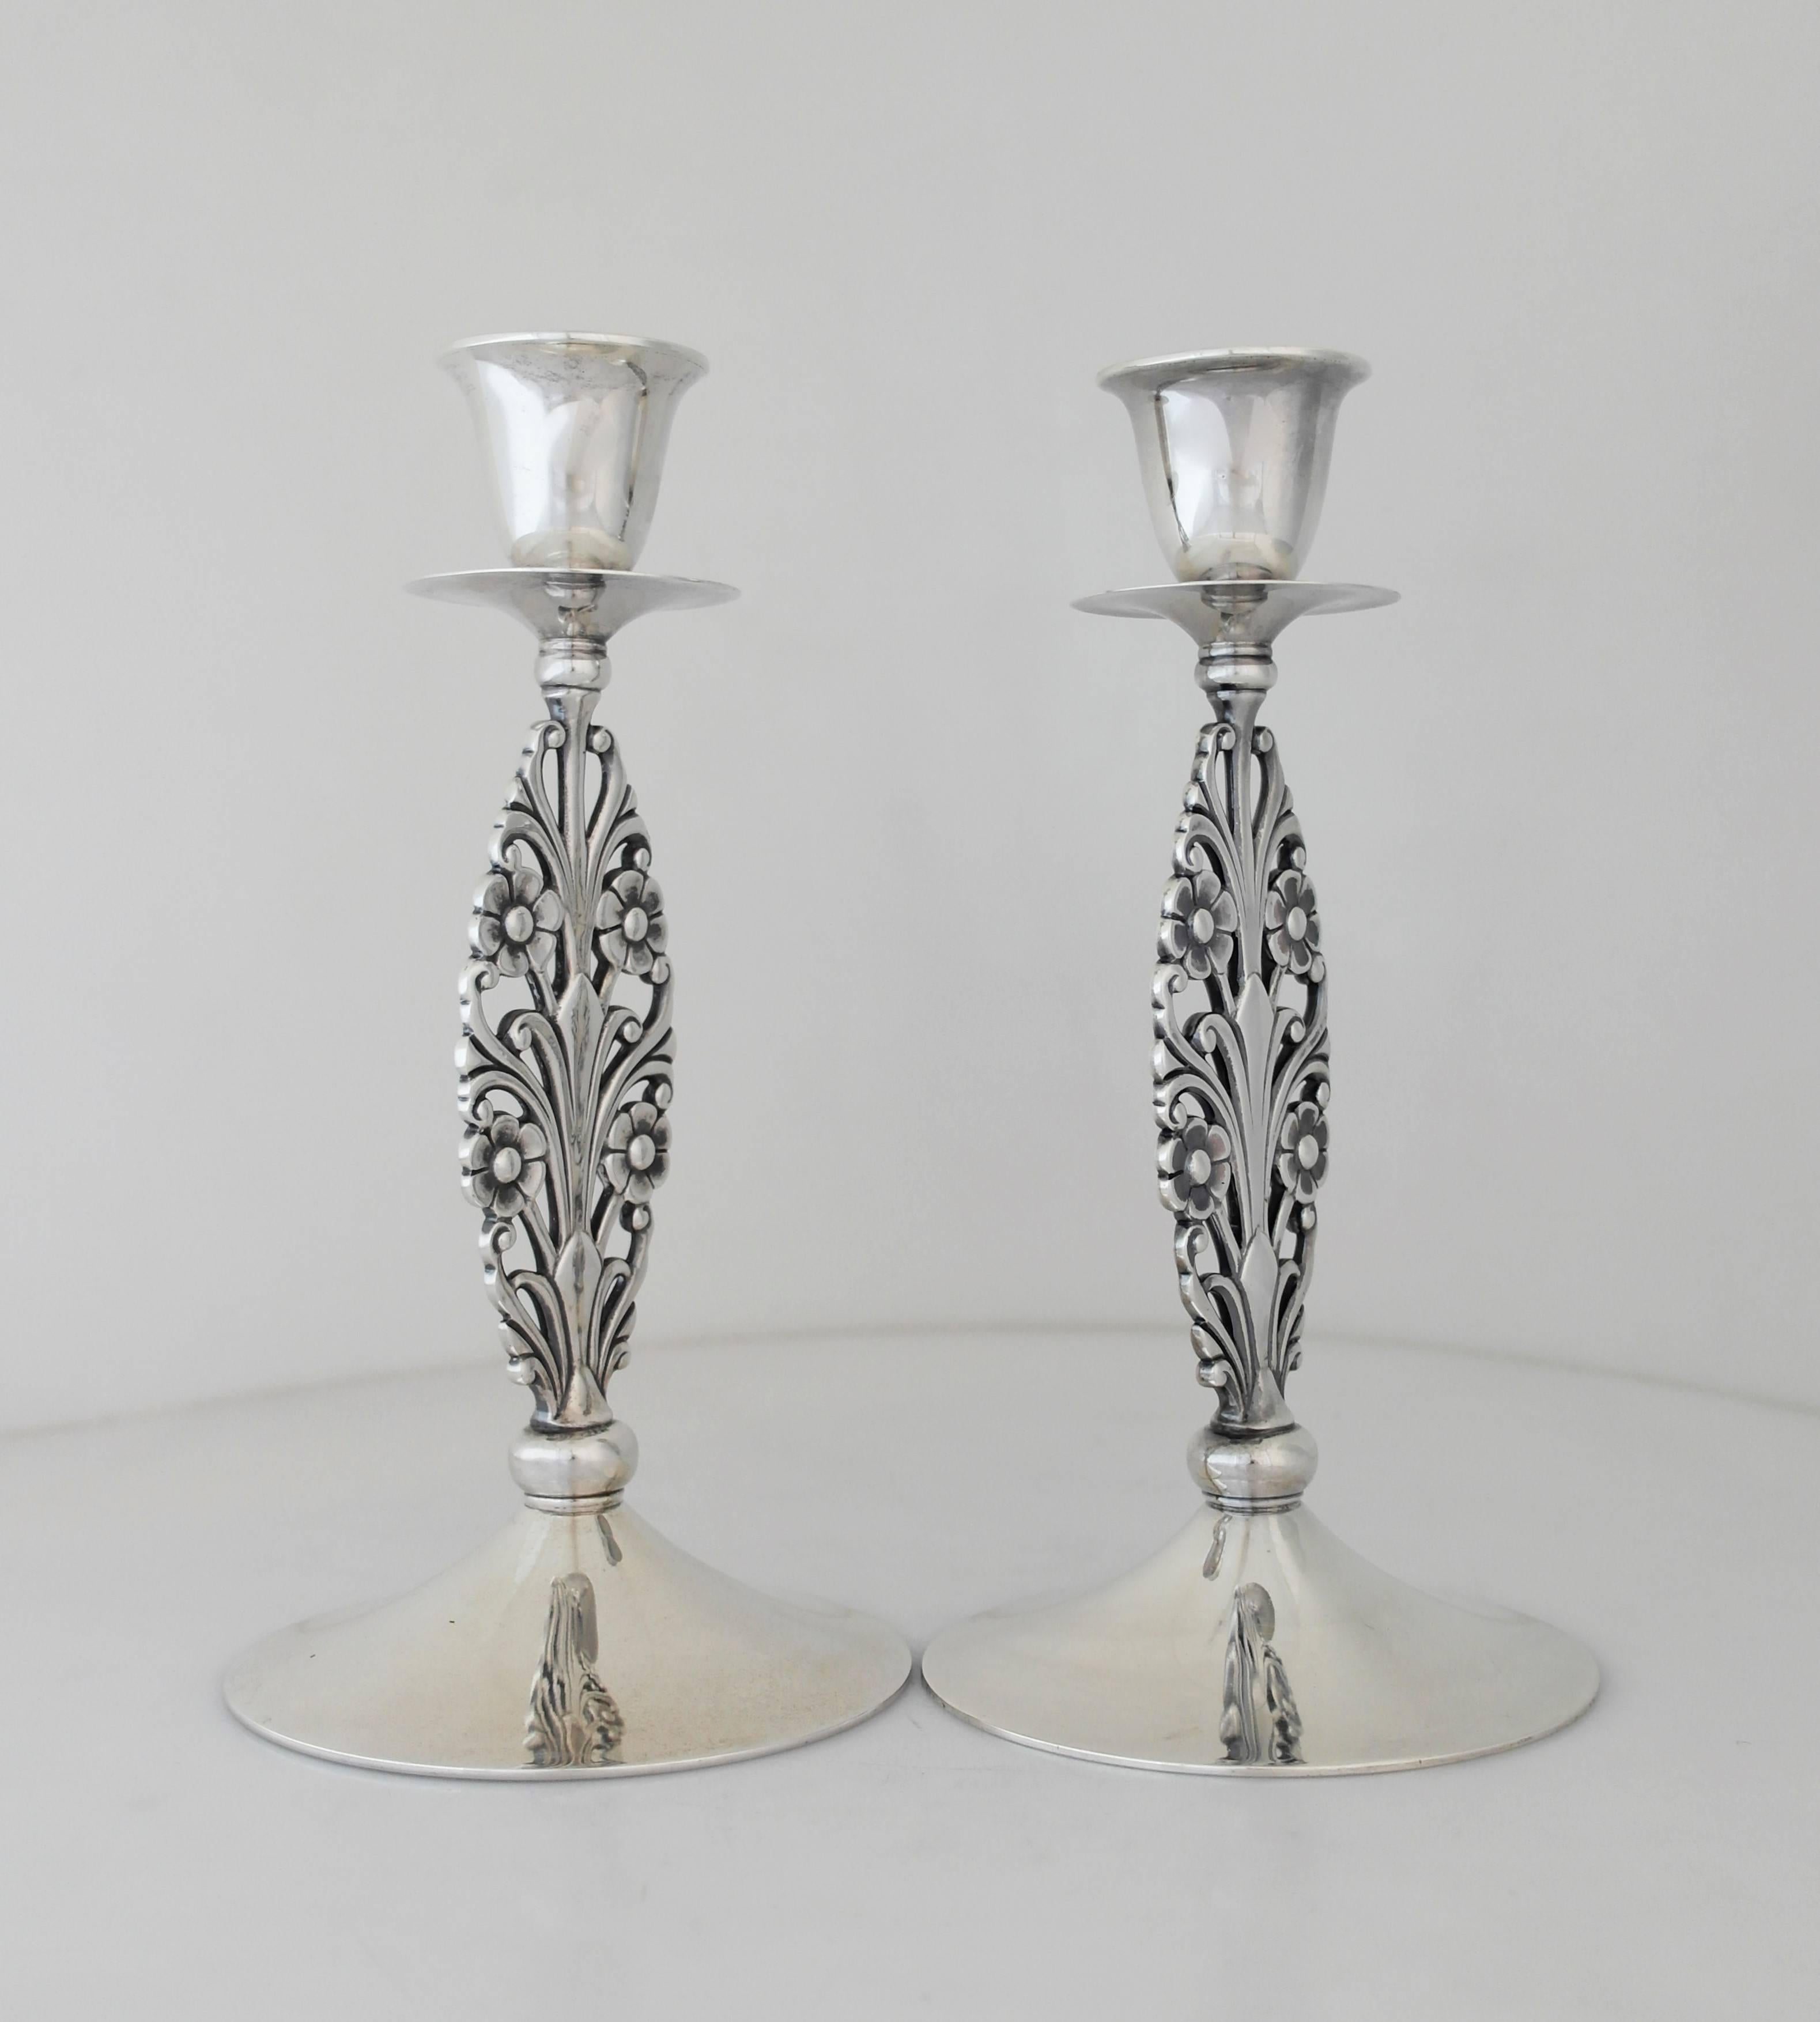 Early 20th Century Rare Tiffany Sterling Silver Art Deco 1925 En Suite Candlesticks/Centerpiece Set